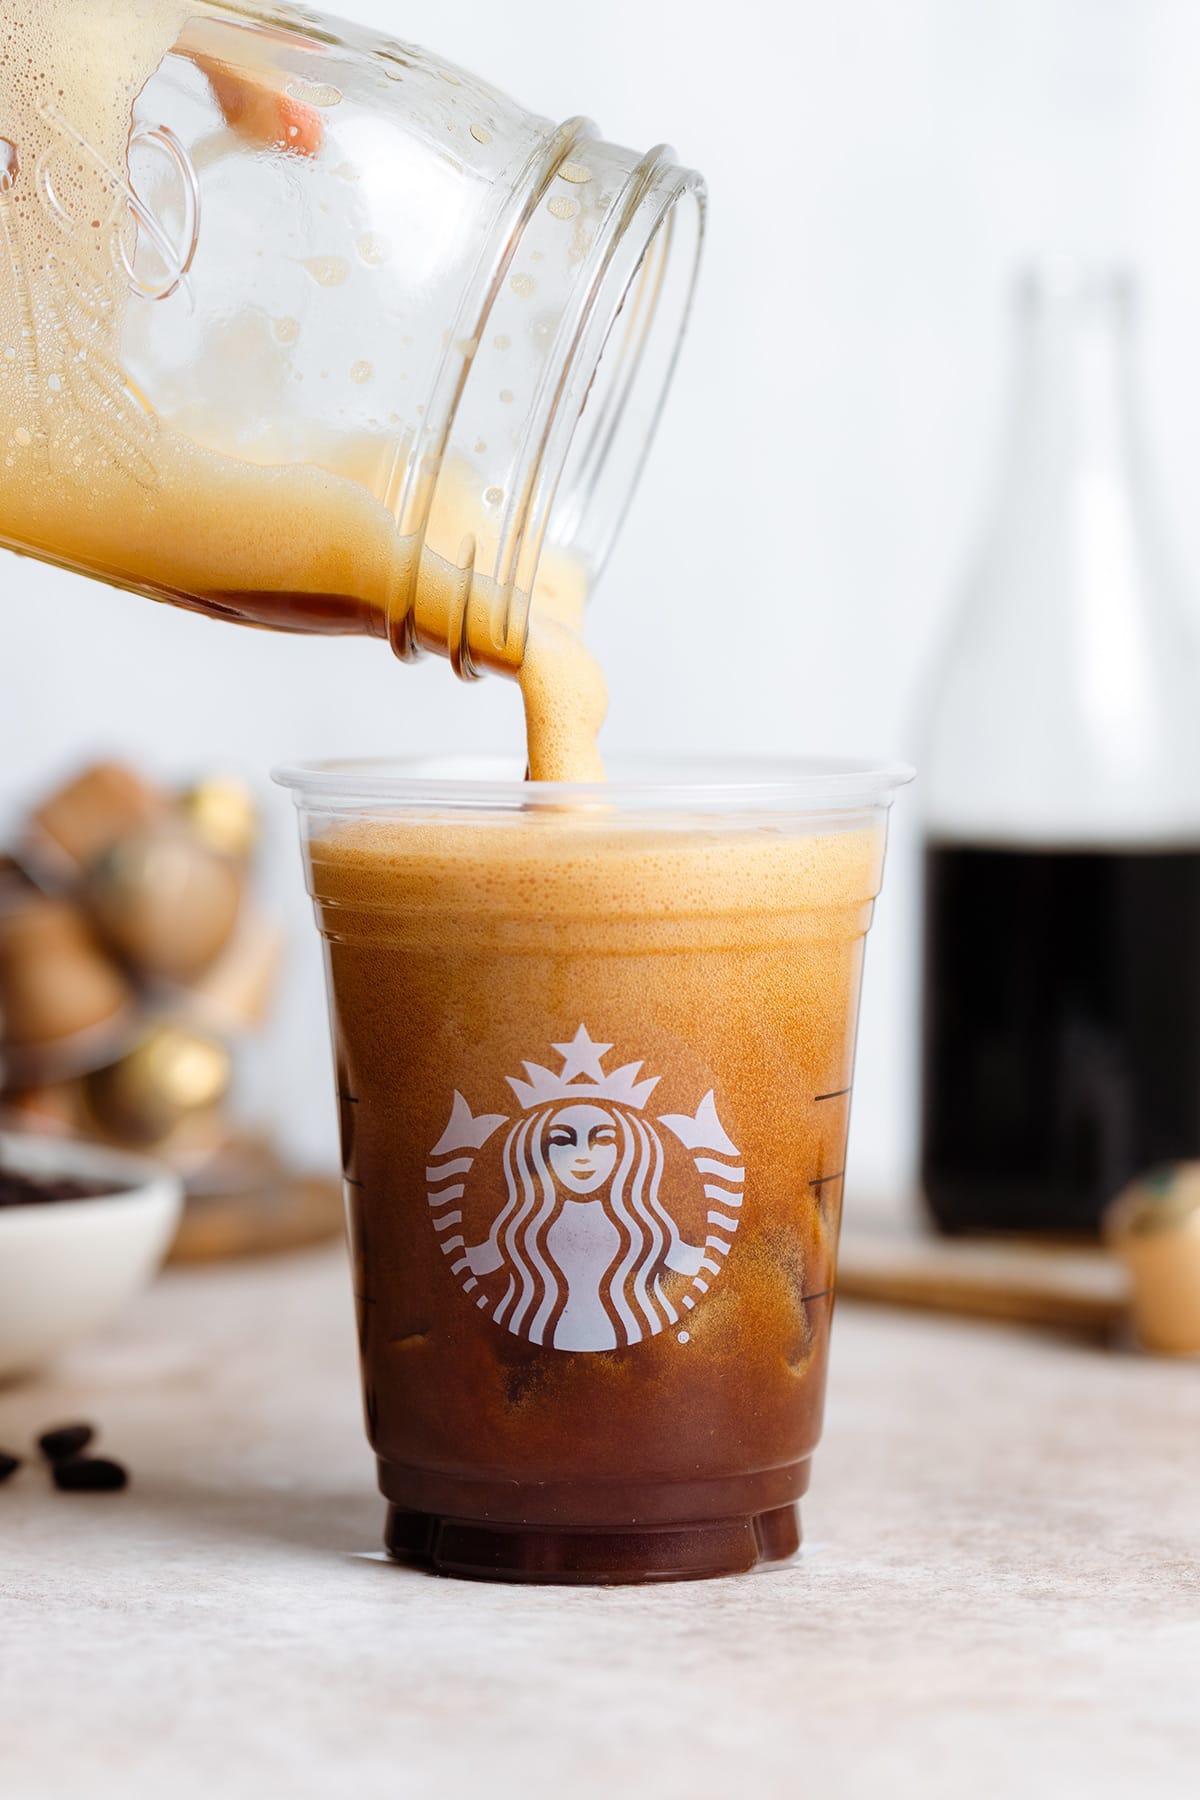 Espresso shaken with ice being poured into a Starbucks cup from a mason jar.